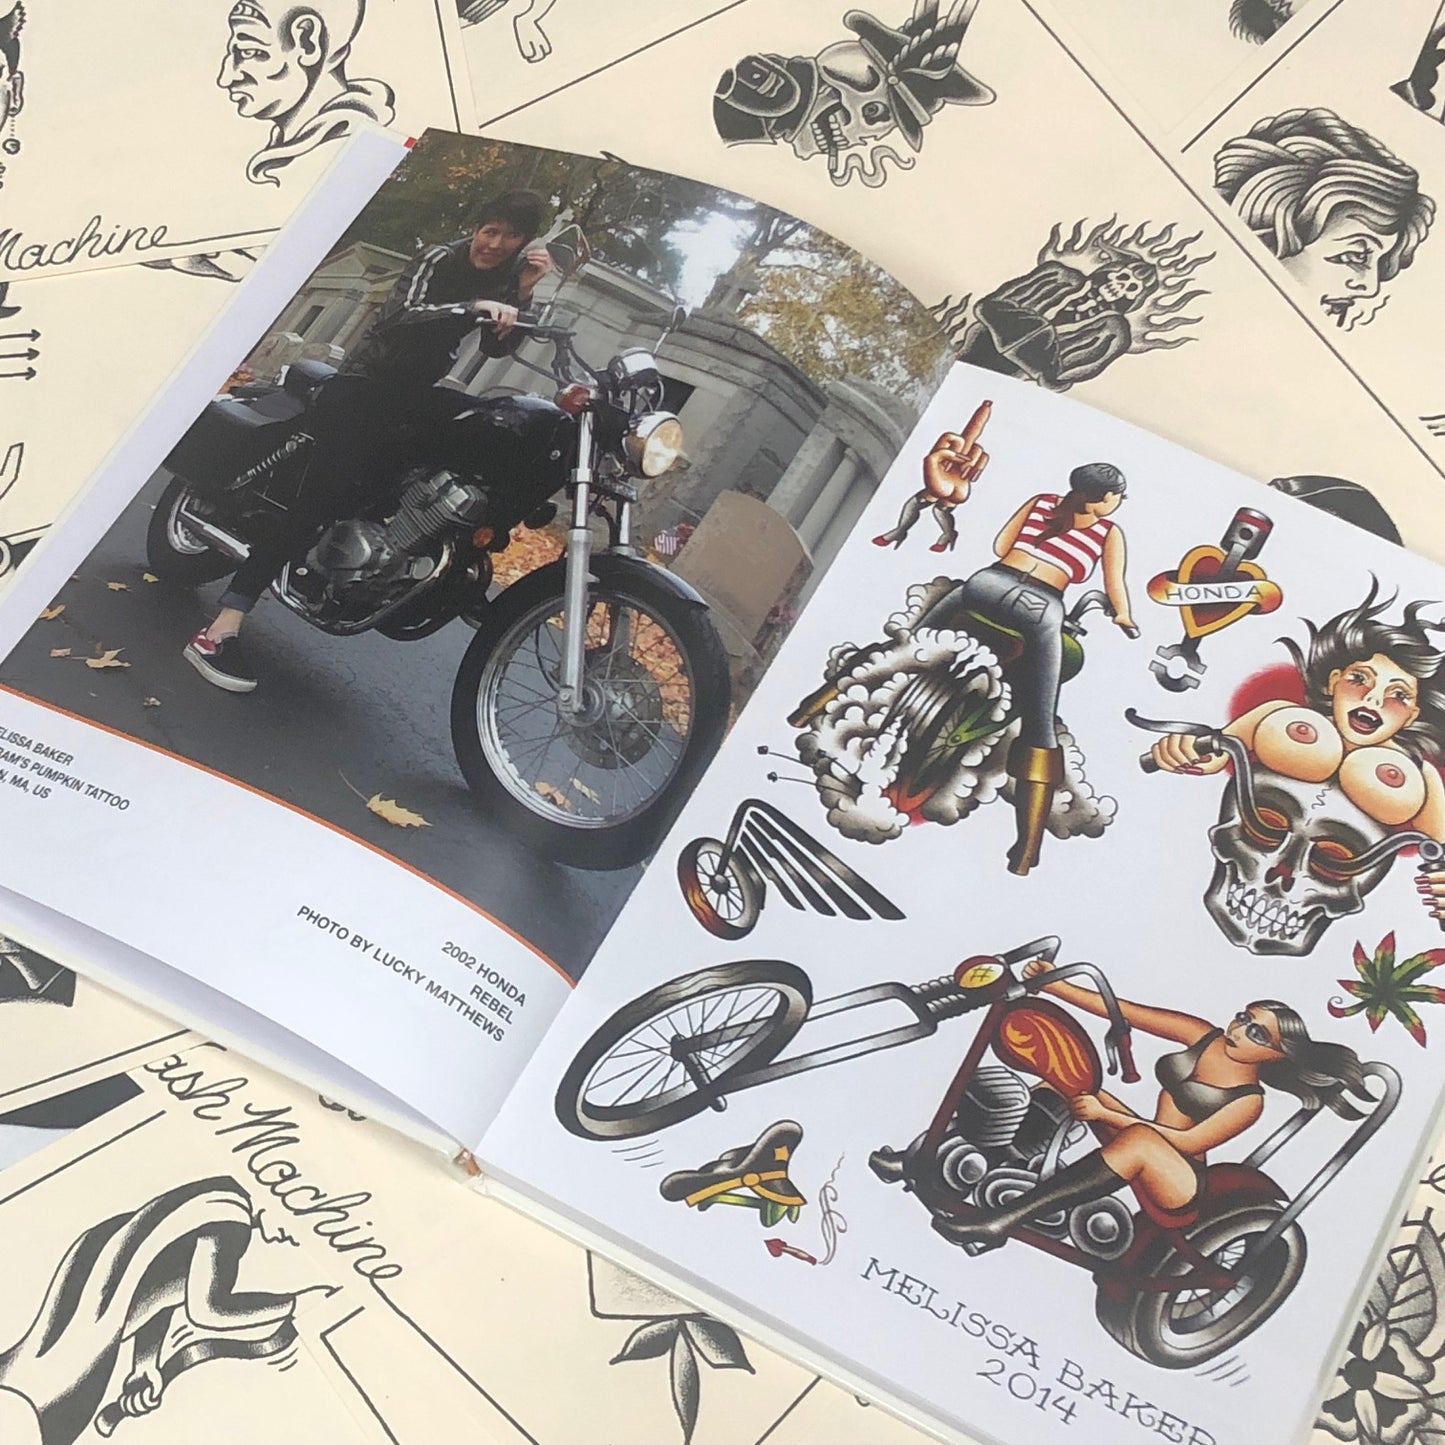 ITW - Motorcycle Flash Book 2014 (OUT OF PRINT)